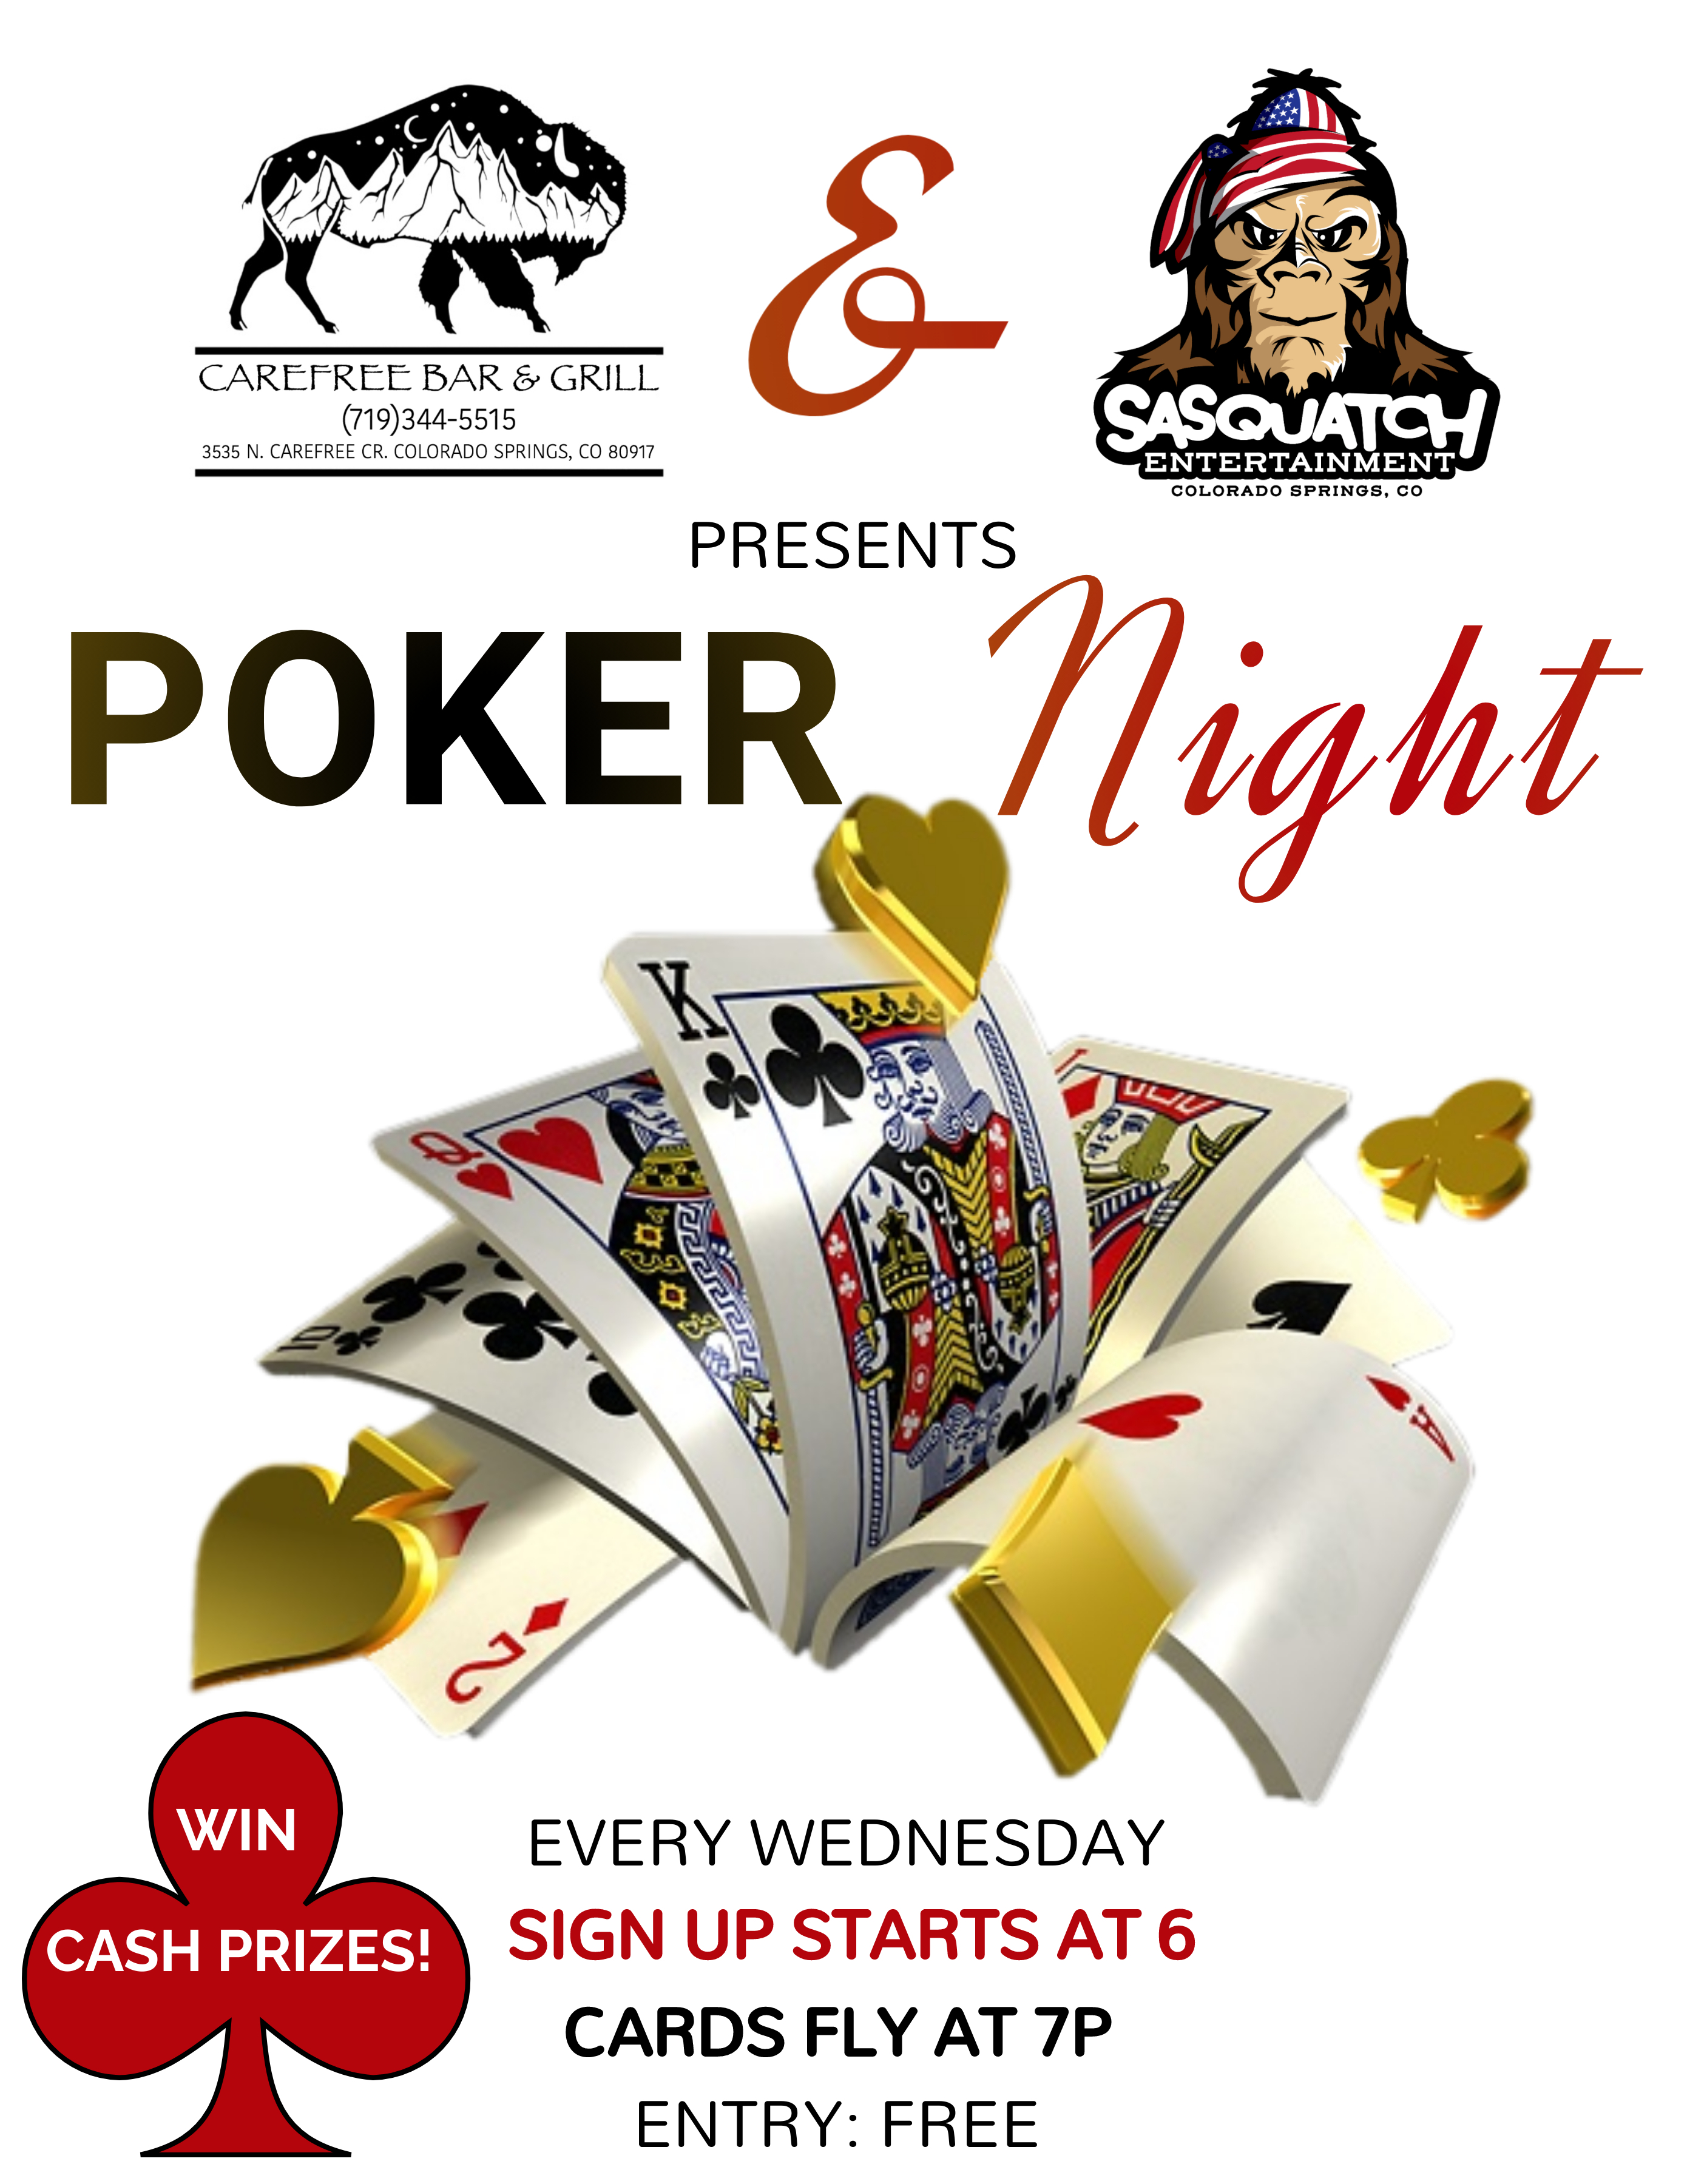 Poker Night at Carefree Bar & Grill in Colorado Springs, CO